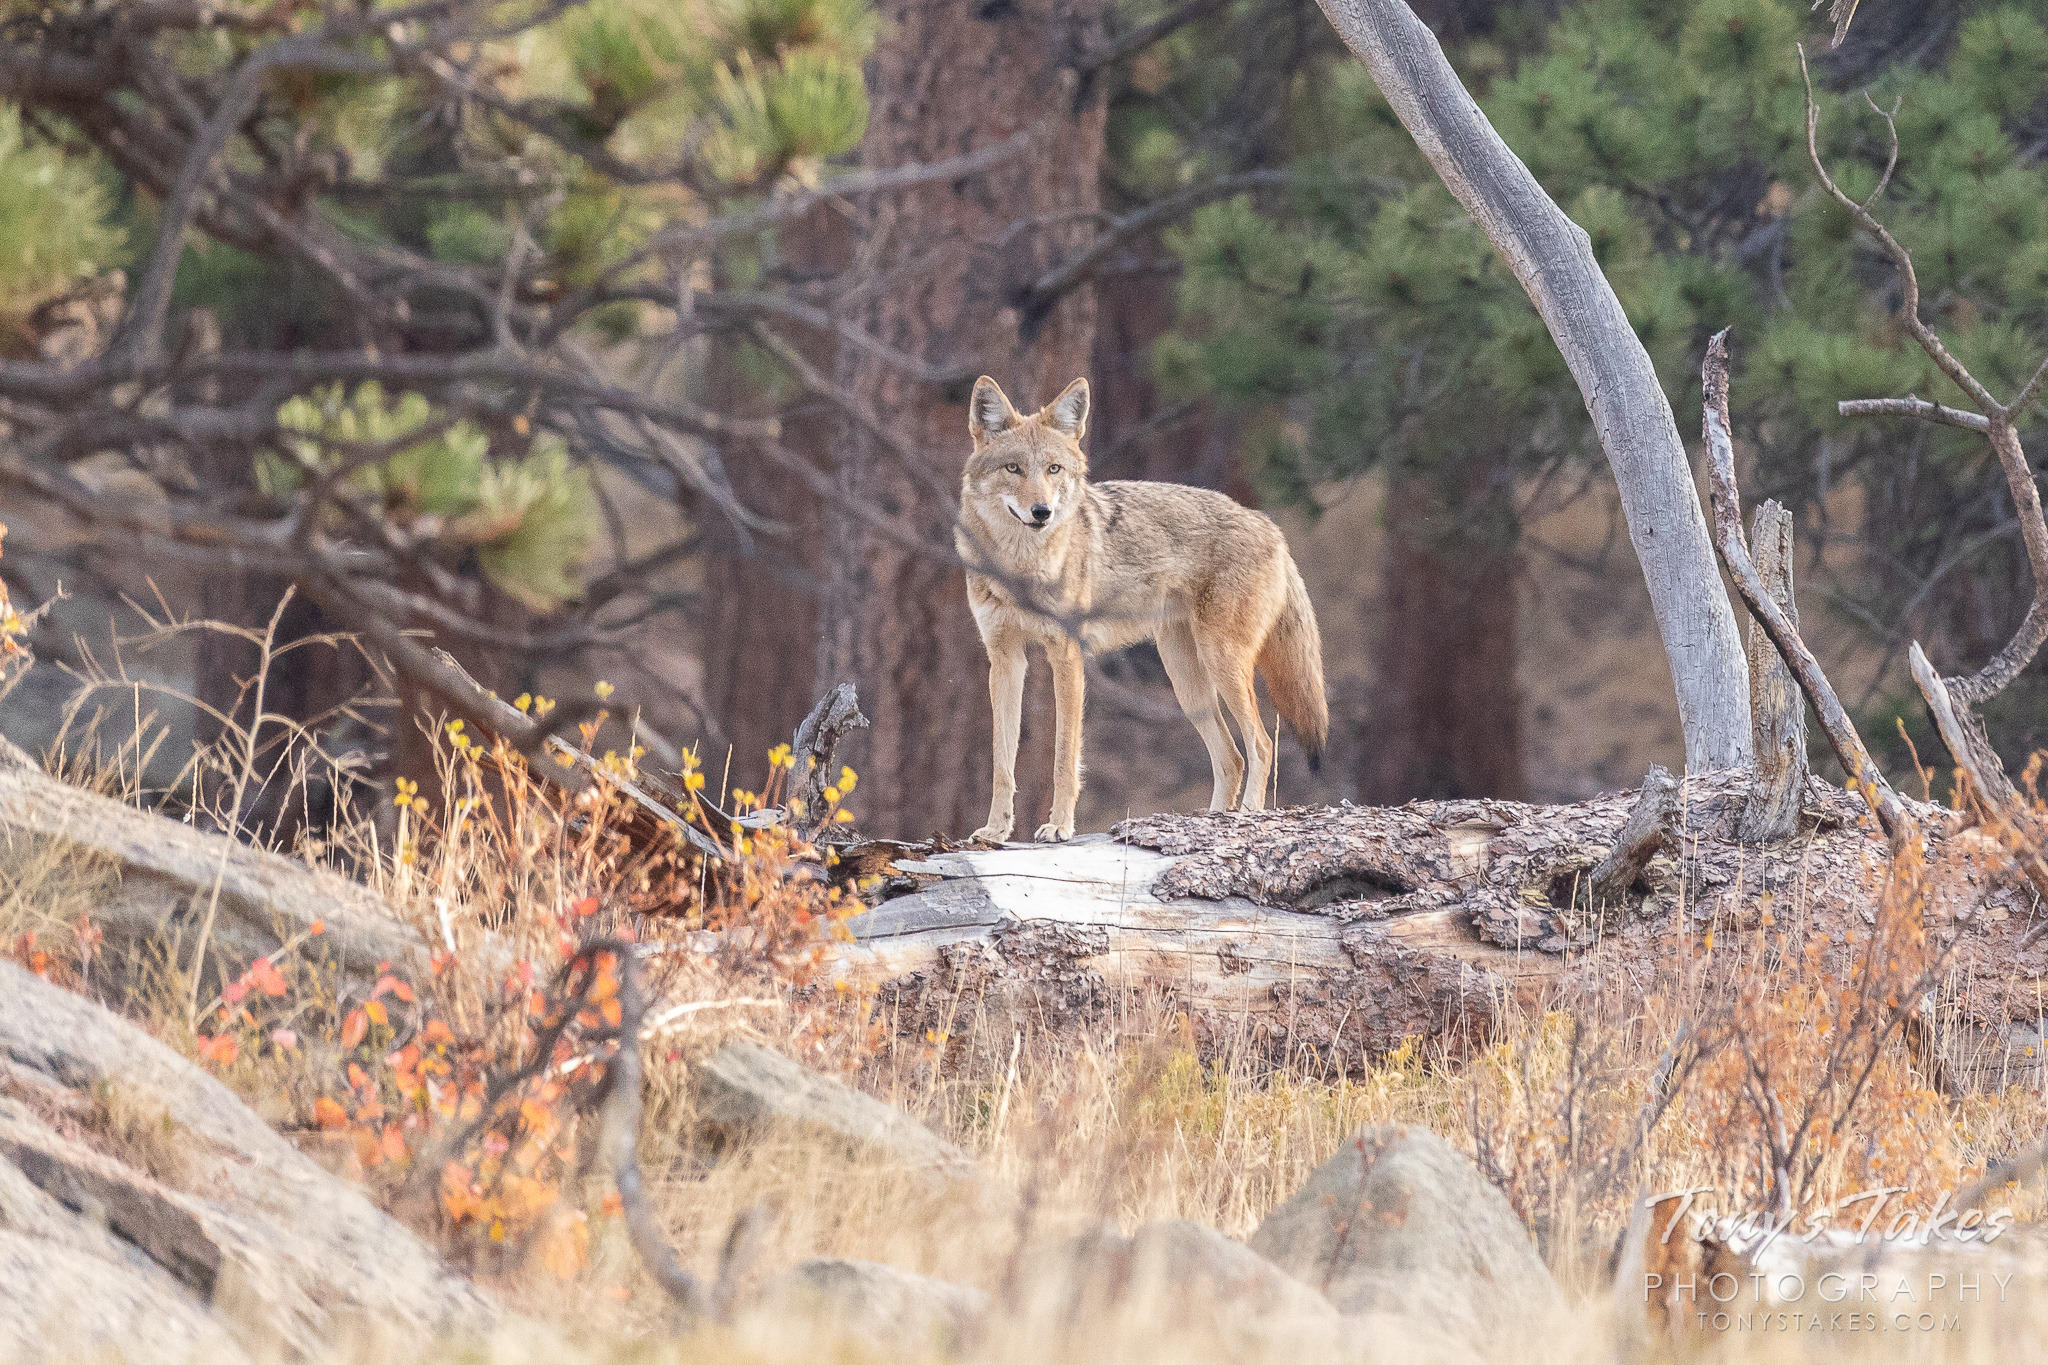 Coyotes on the prowl in the high country